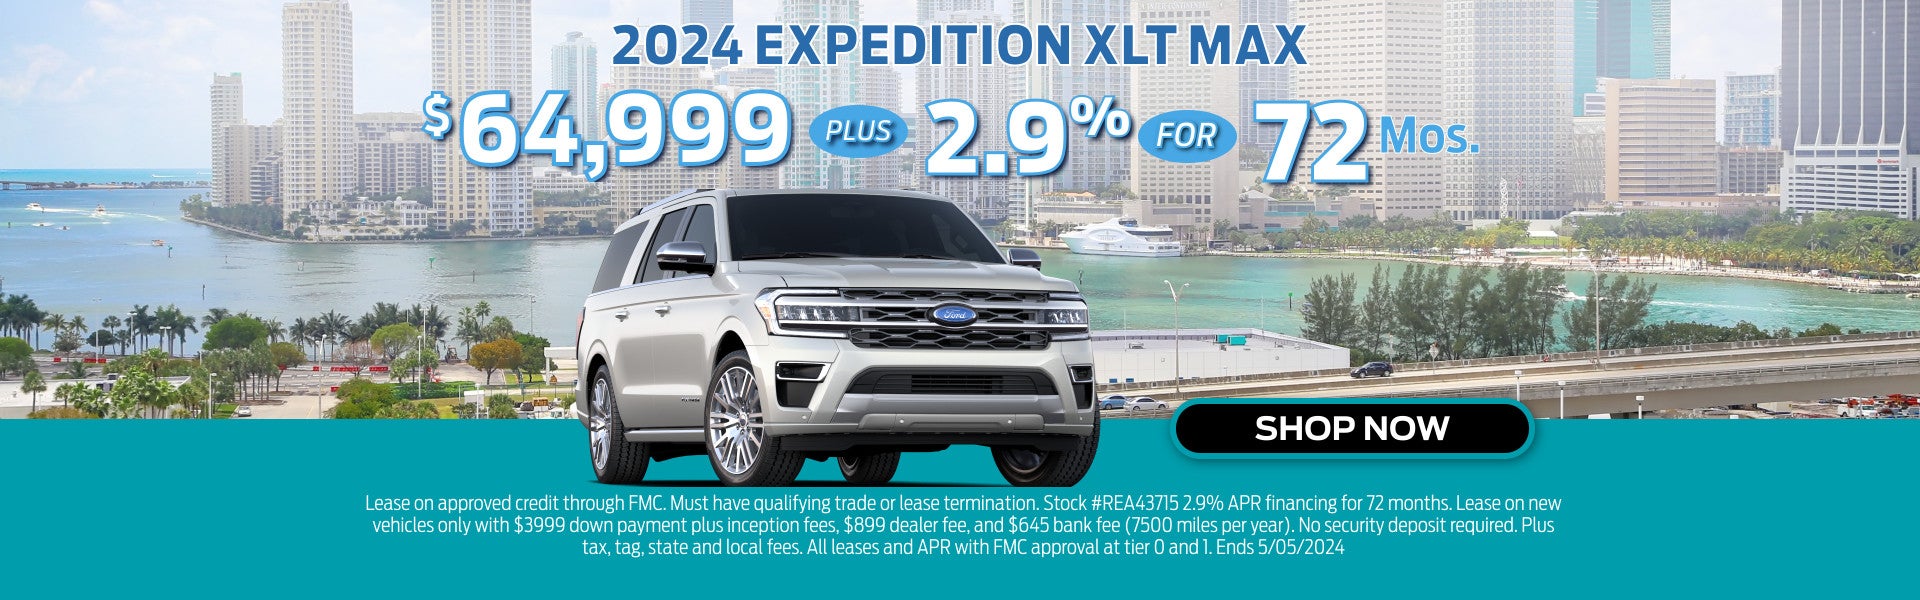 2024 Expedition XLT Max, 2.9% for 72 months